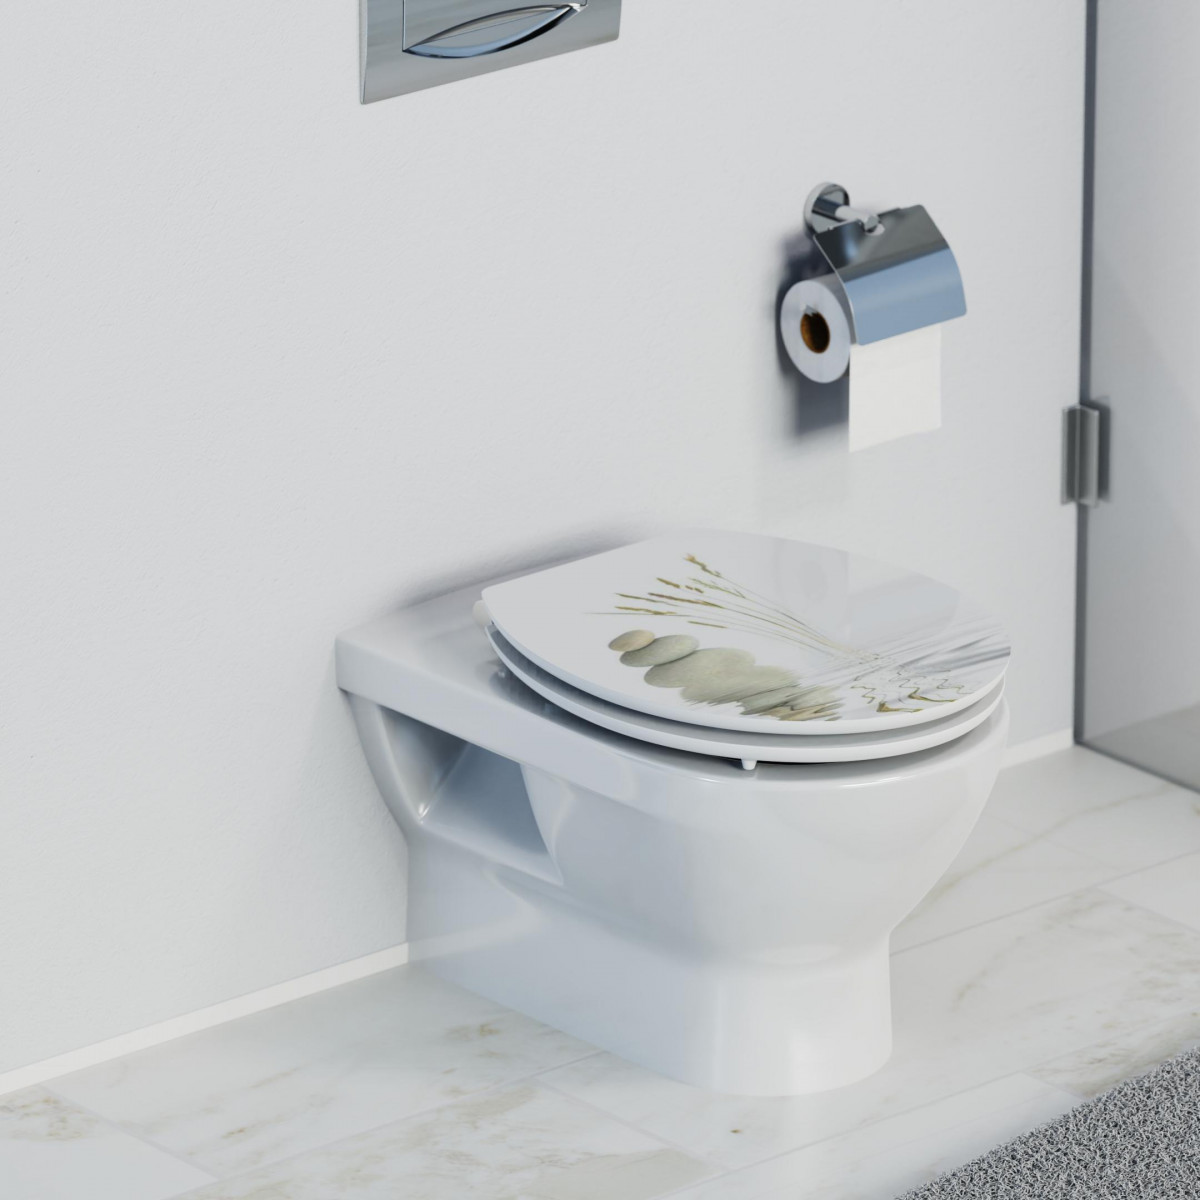 MDF HG Toilet Seat BALANCE with Soft Close